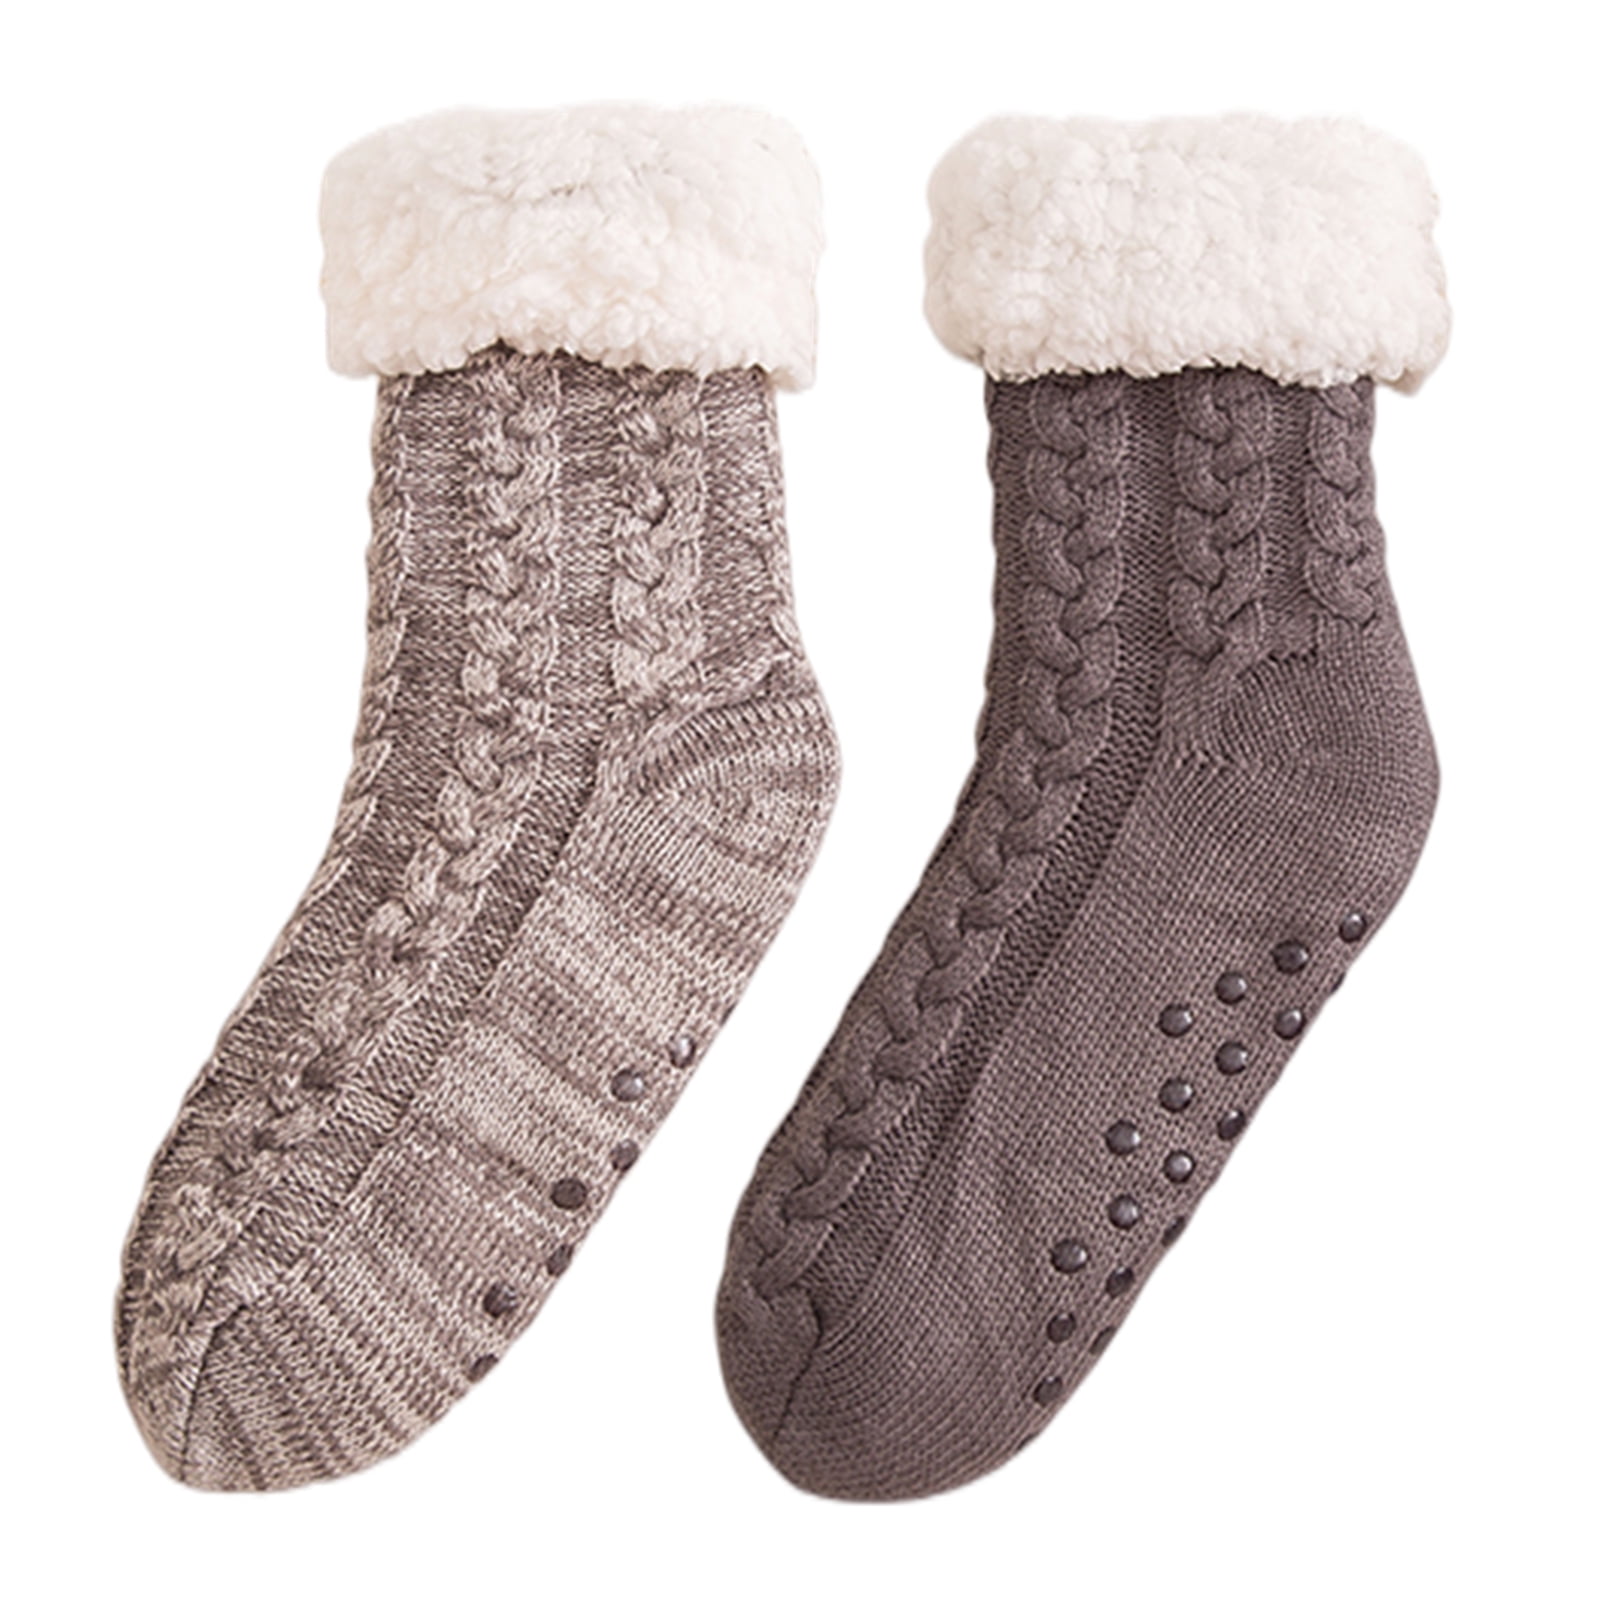 Up To 63% Off Cozy Nights Sherpa Fleece Lined Slipper Socks | Groupon